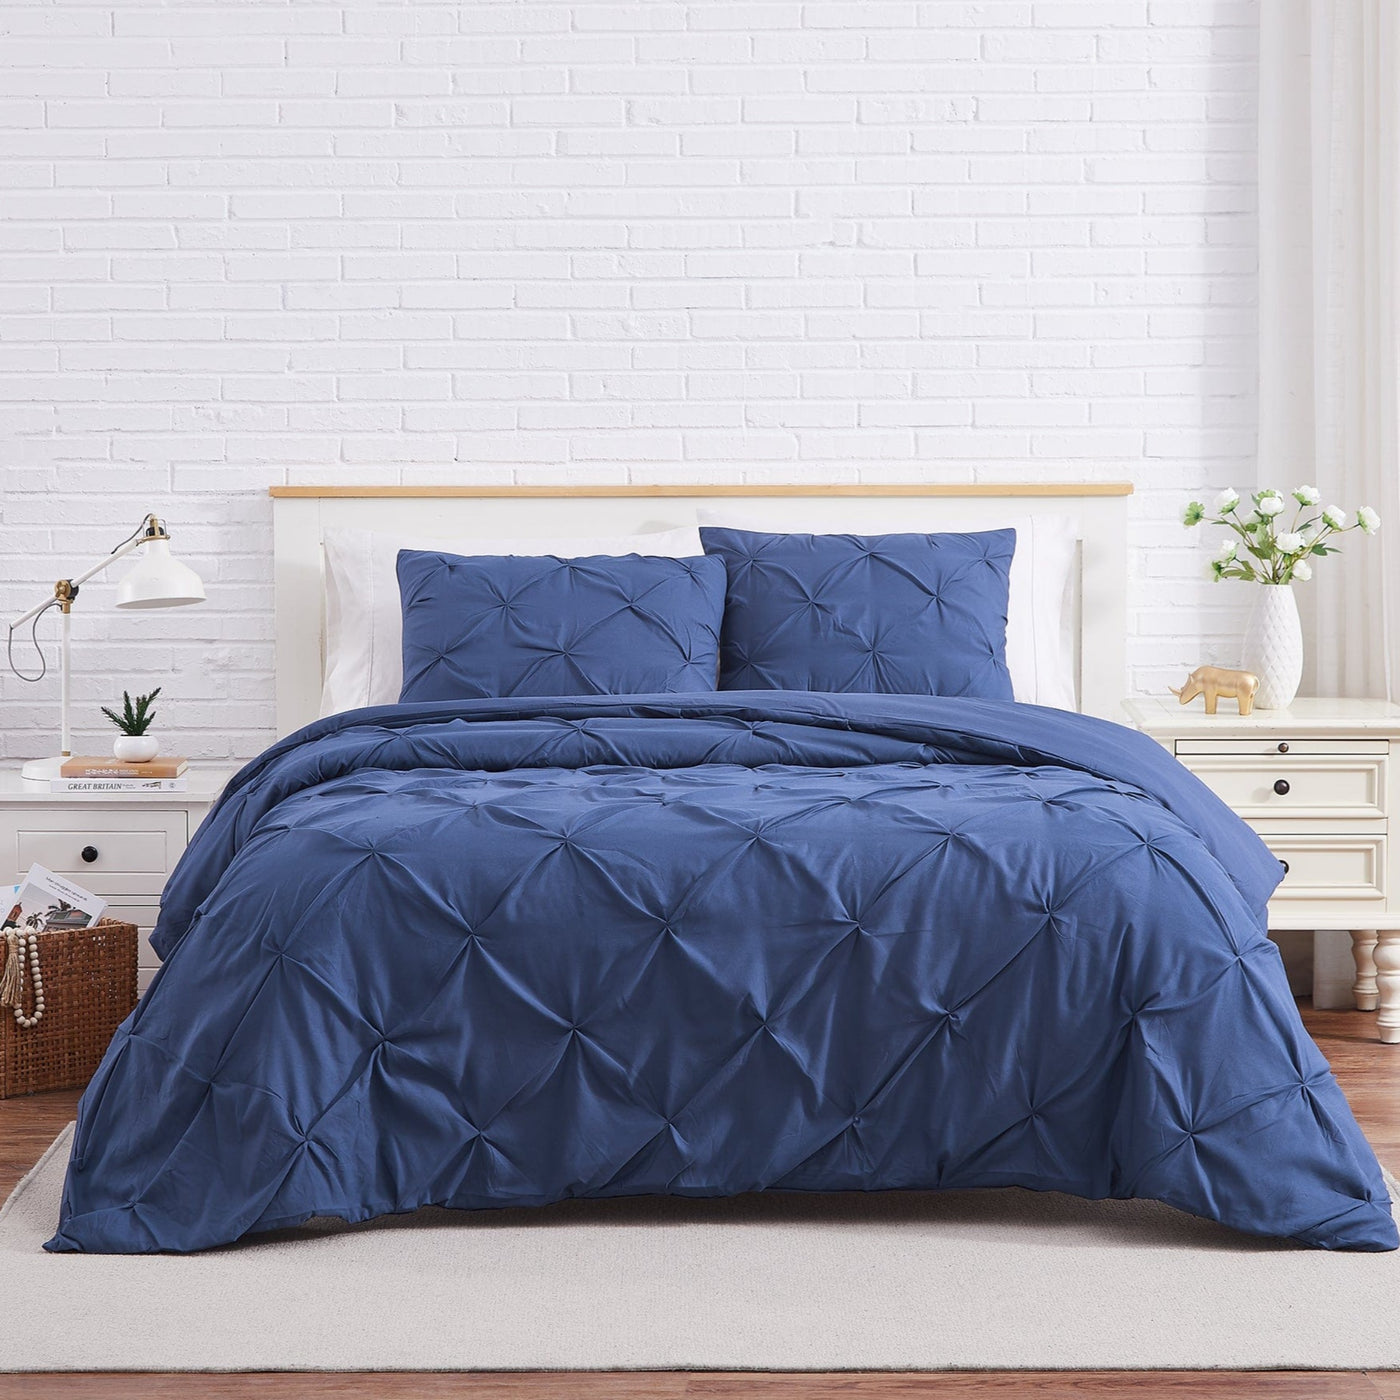 Front View of Pintuck Pinch Pleated Duvet Cover Set in Dark Blue#color_vilano-dark-blue